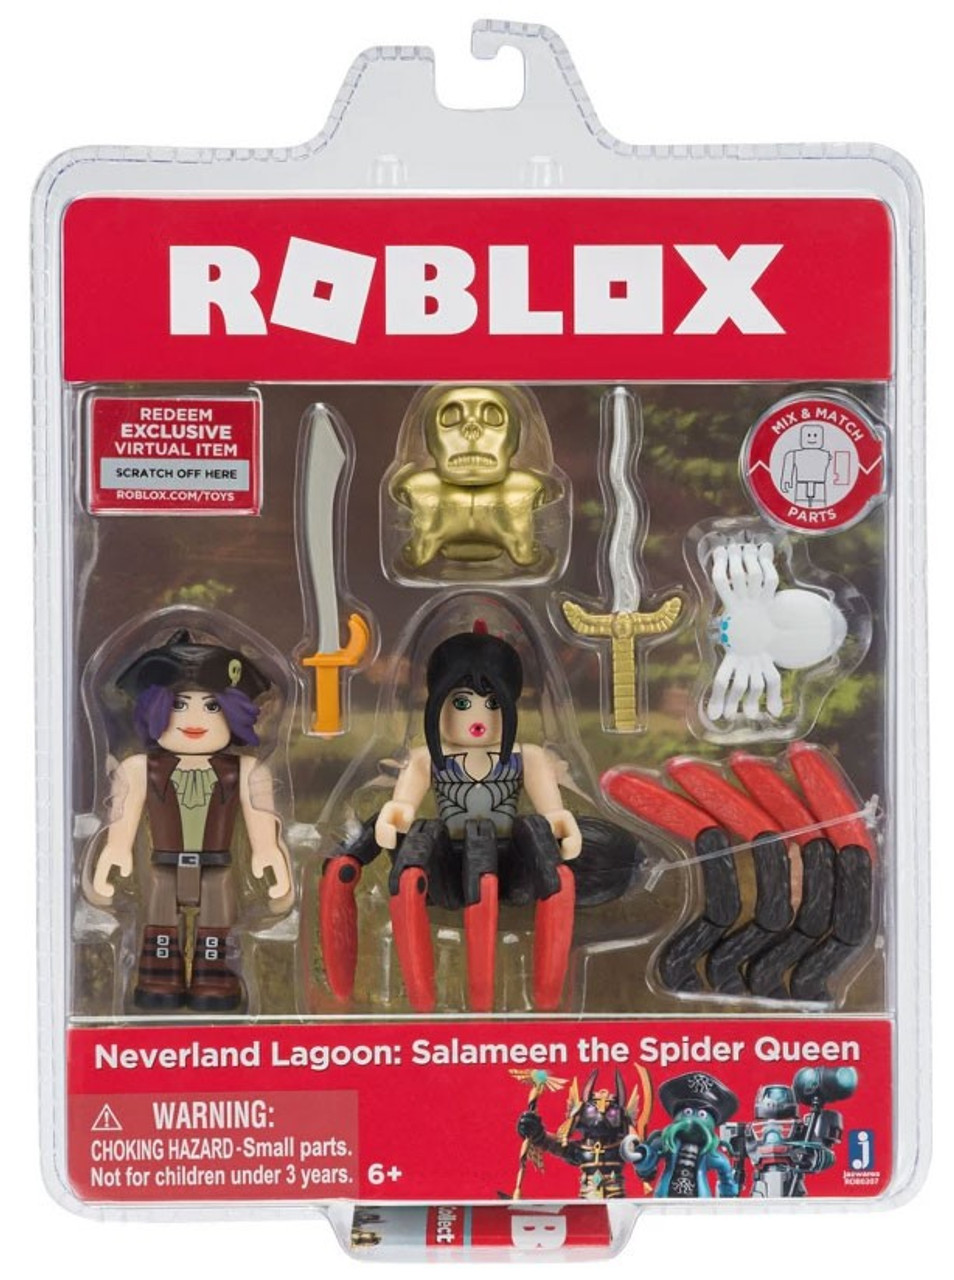 Roblox Neverland Lagoon Salameen The Spider Queen Action Figure - details about roblox neverland lagoon celebrity collection 4 figure pack wvirtual code